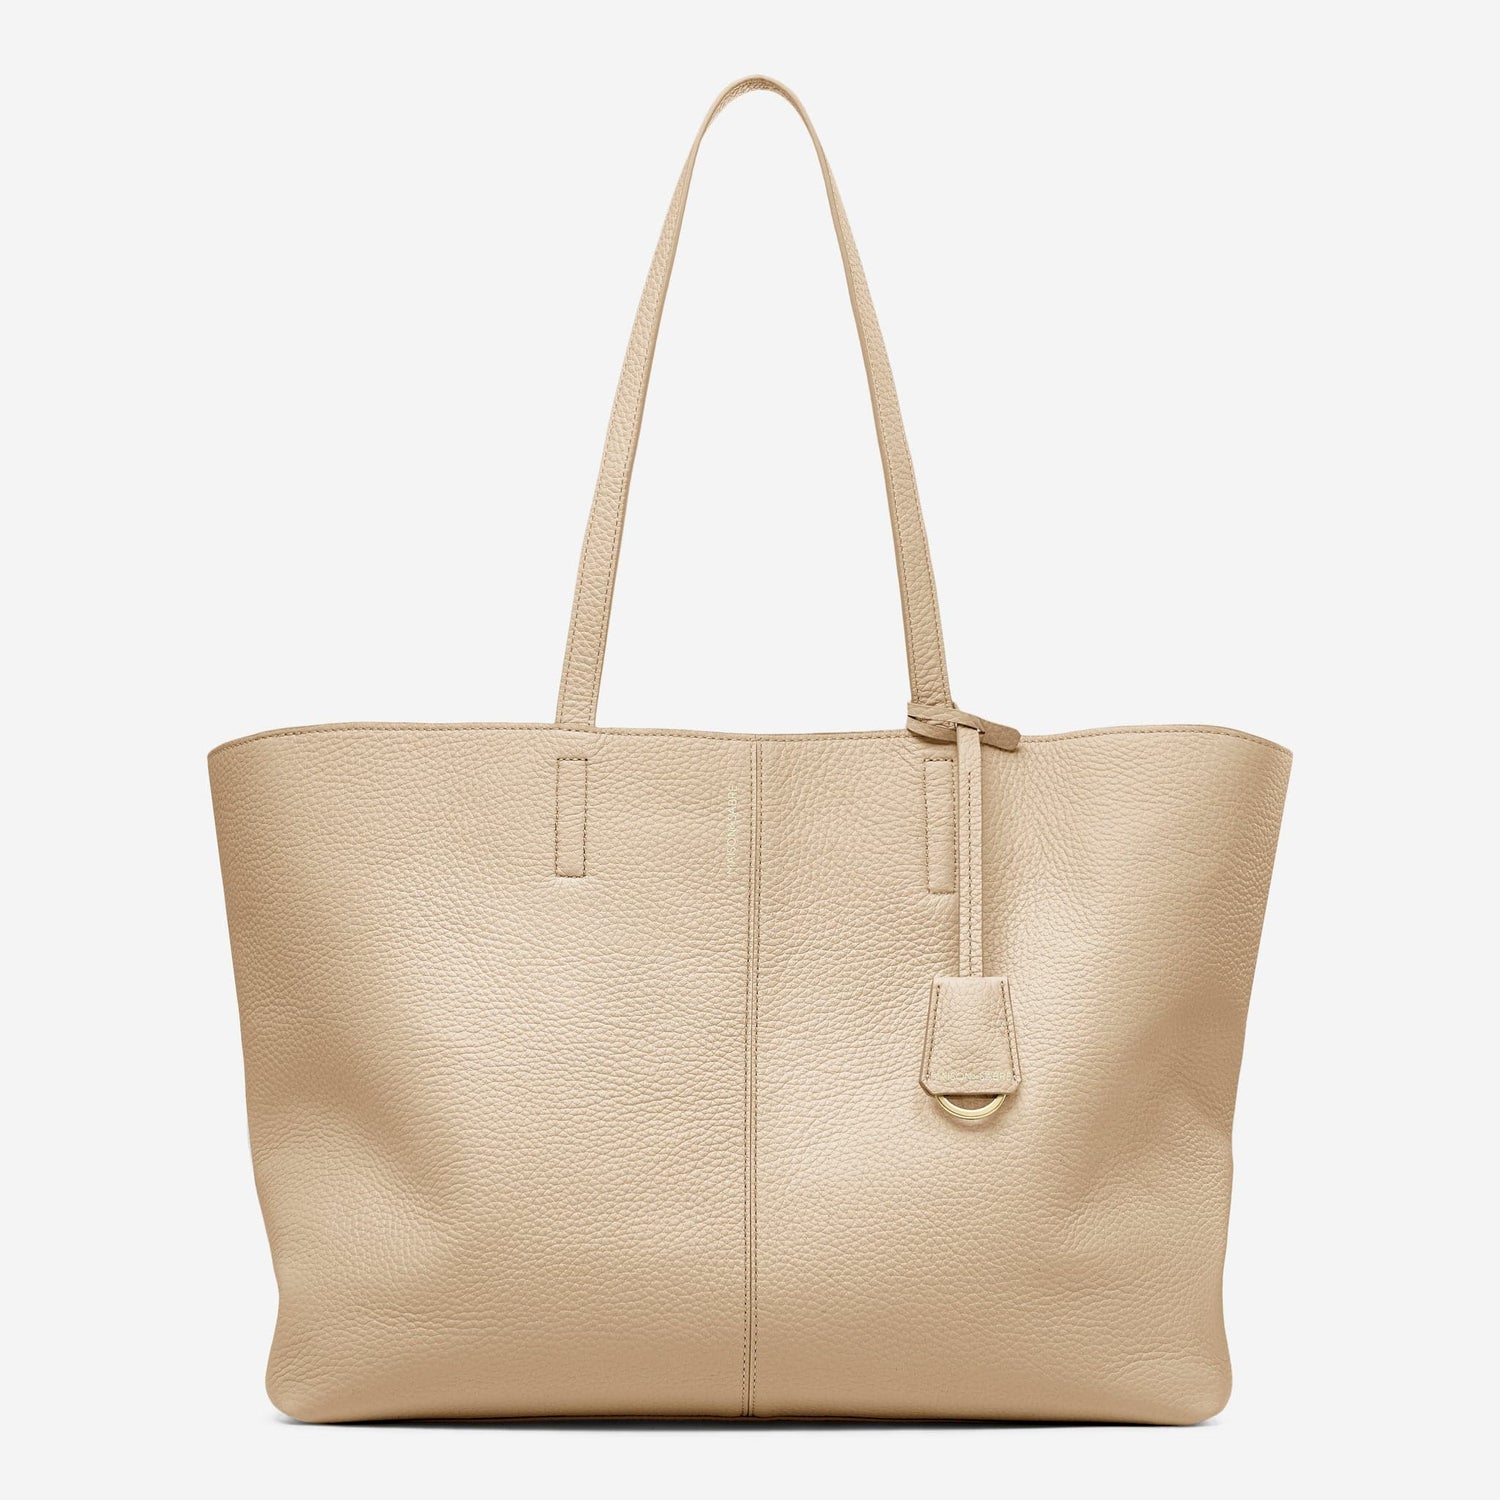 The Zipped Soft Tote